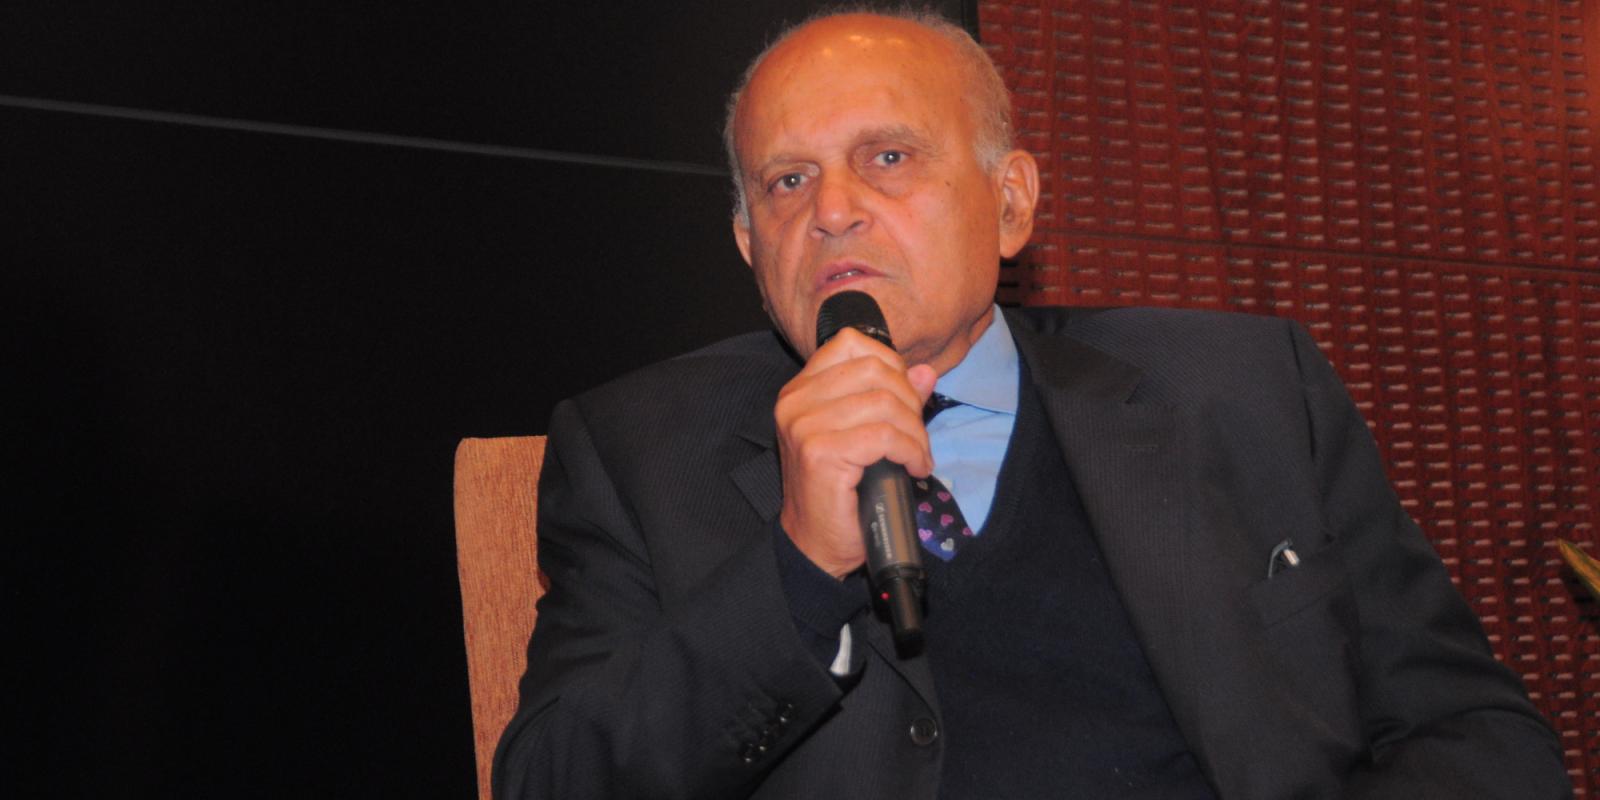 Sir Magdi Yacoub received a Global Impact Award from AUC in 2015, when he also came to AUC for a collaborative partnership between the University and the Magdi Yacoub Heart Foundation